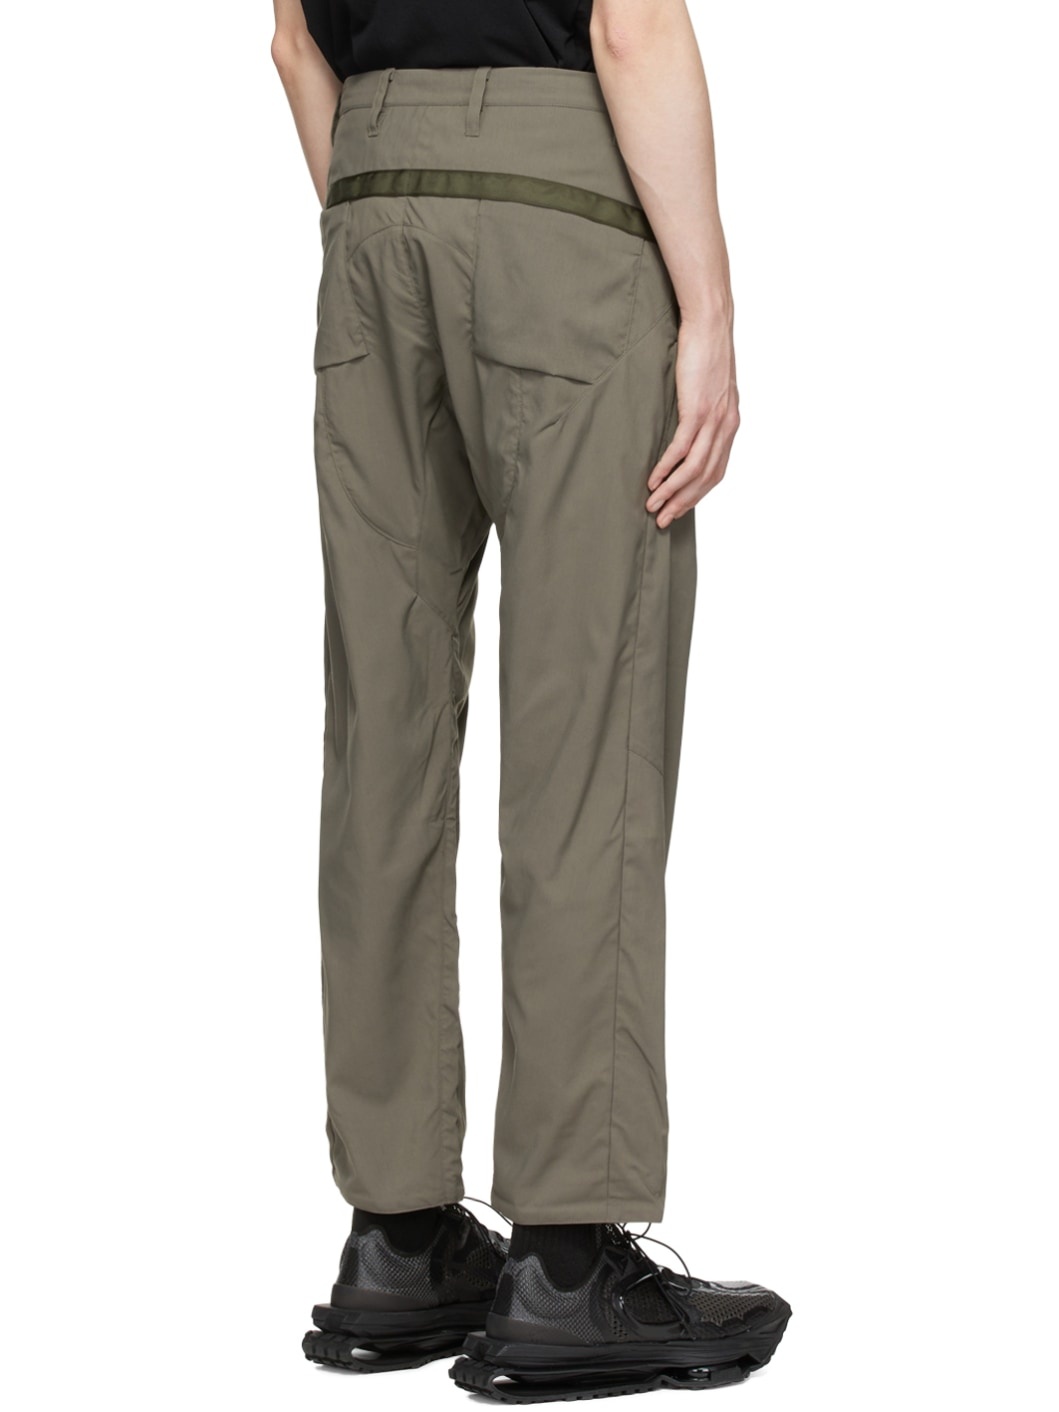 Grey P39-M Trousers - 3